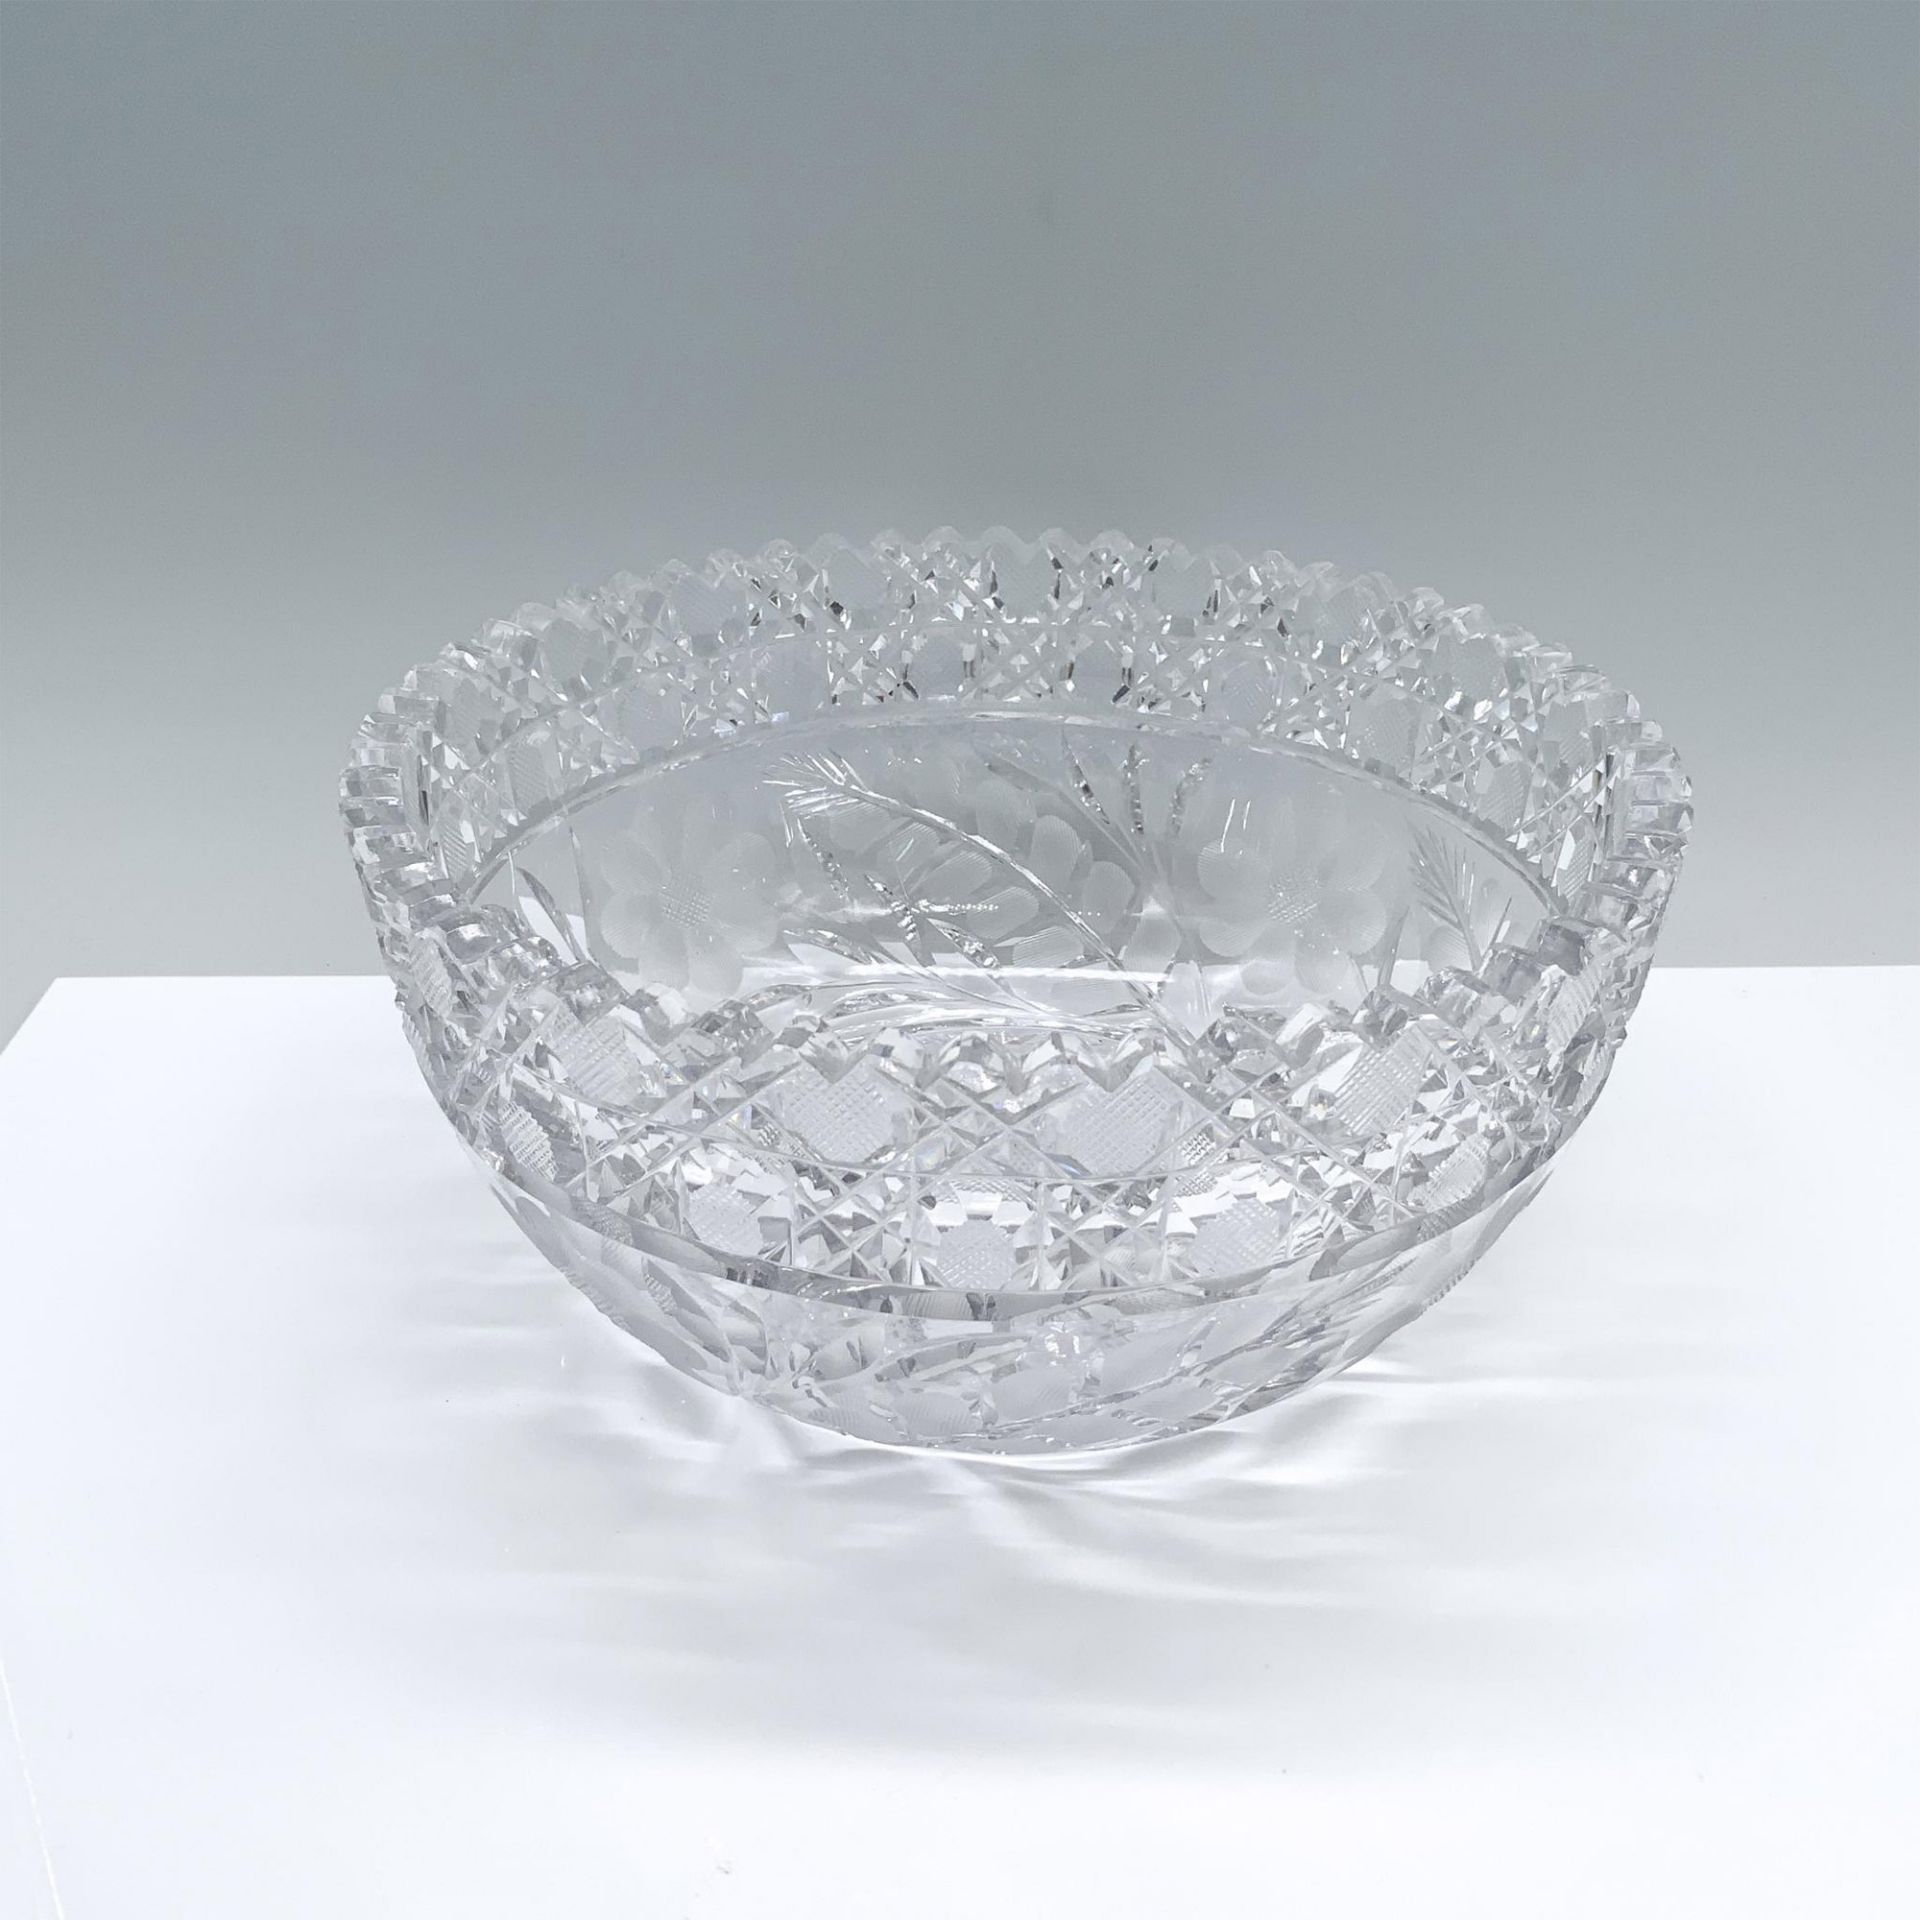 Glass Cut Floral Themed Serving Bowl - Image 2 of 3